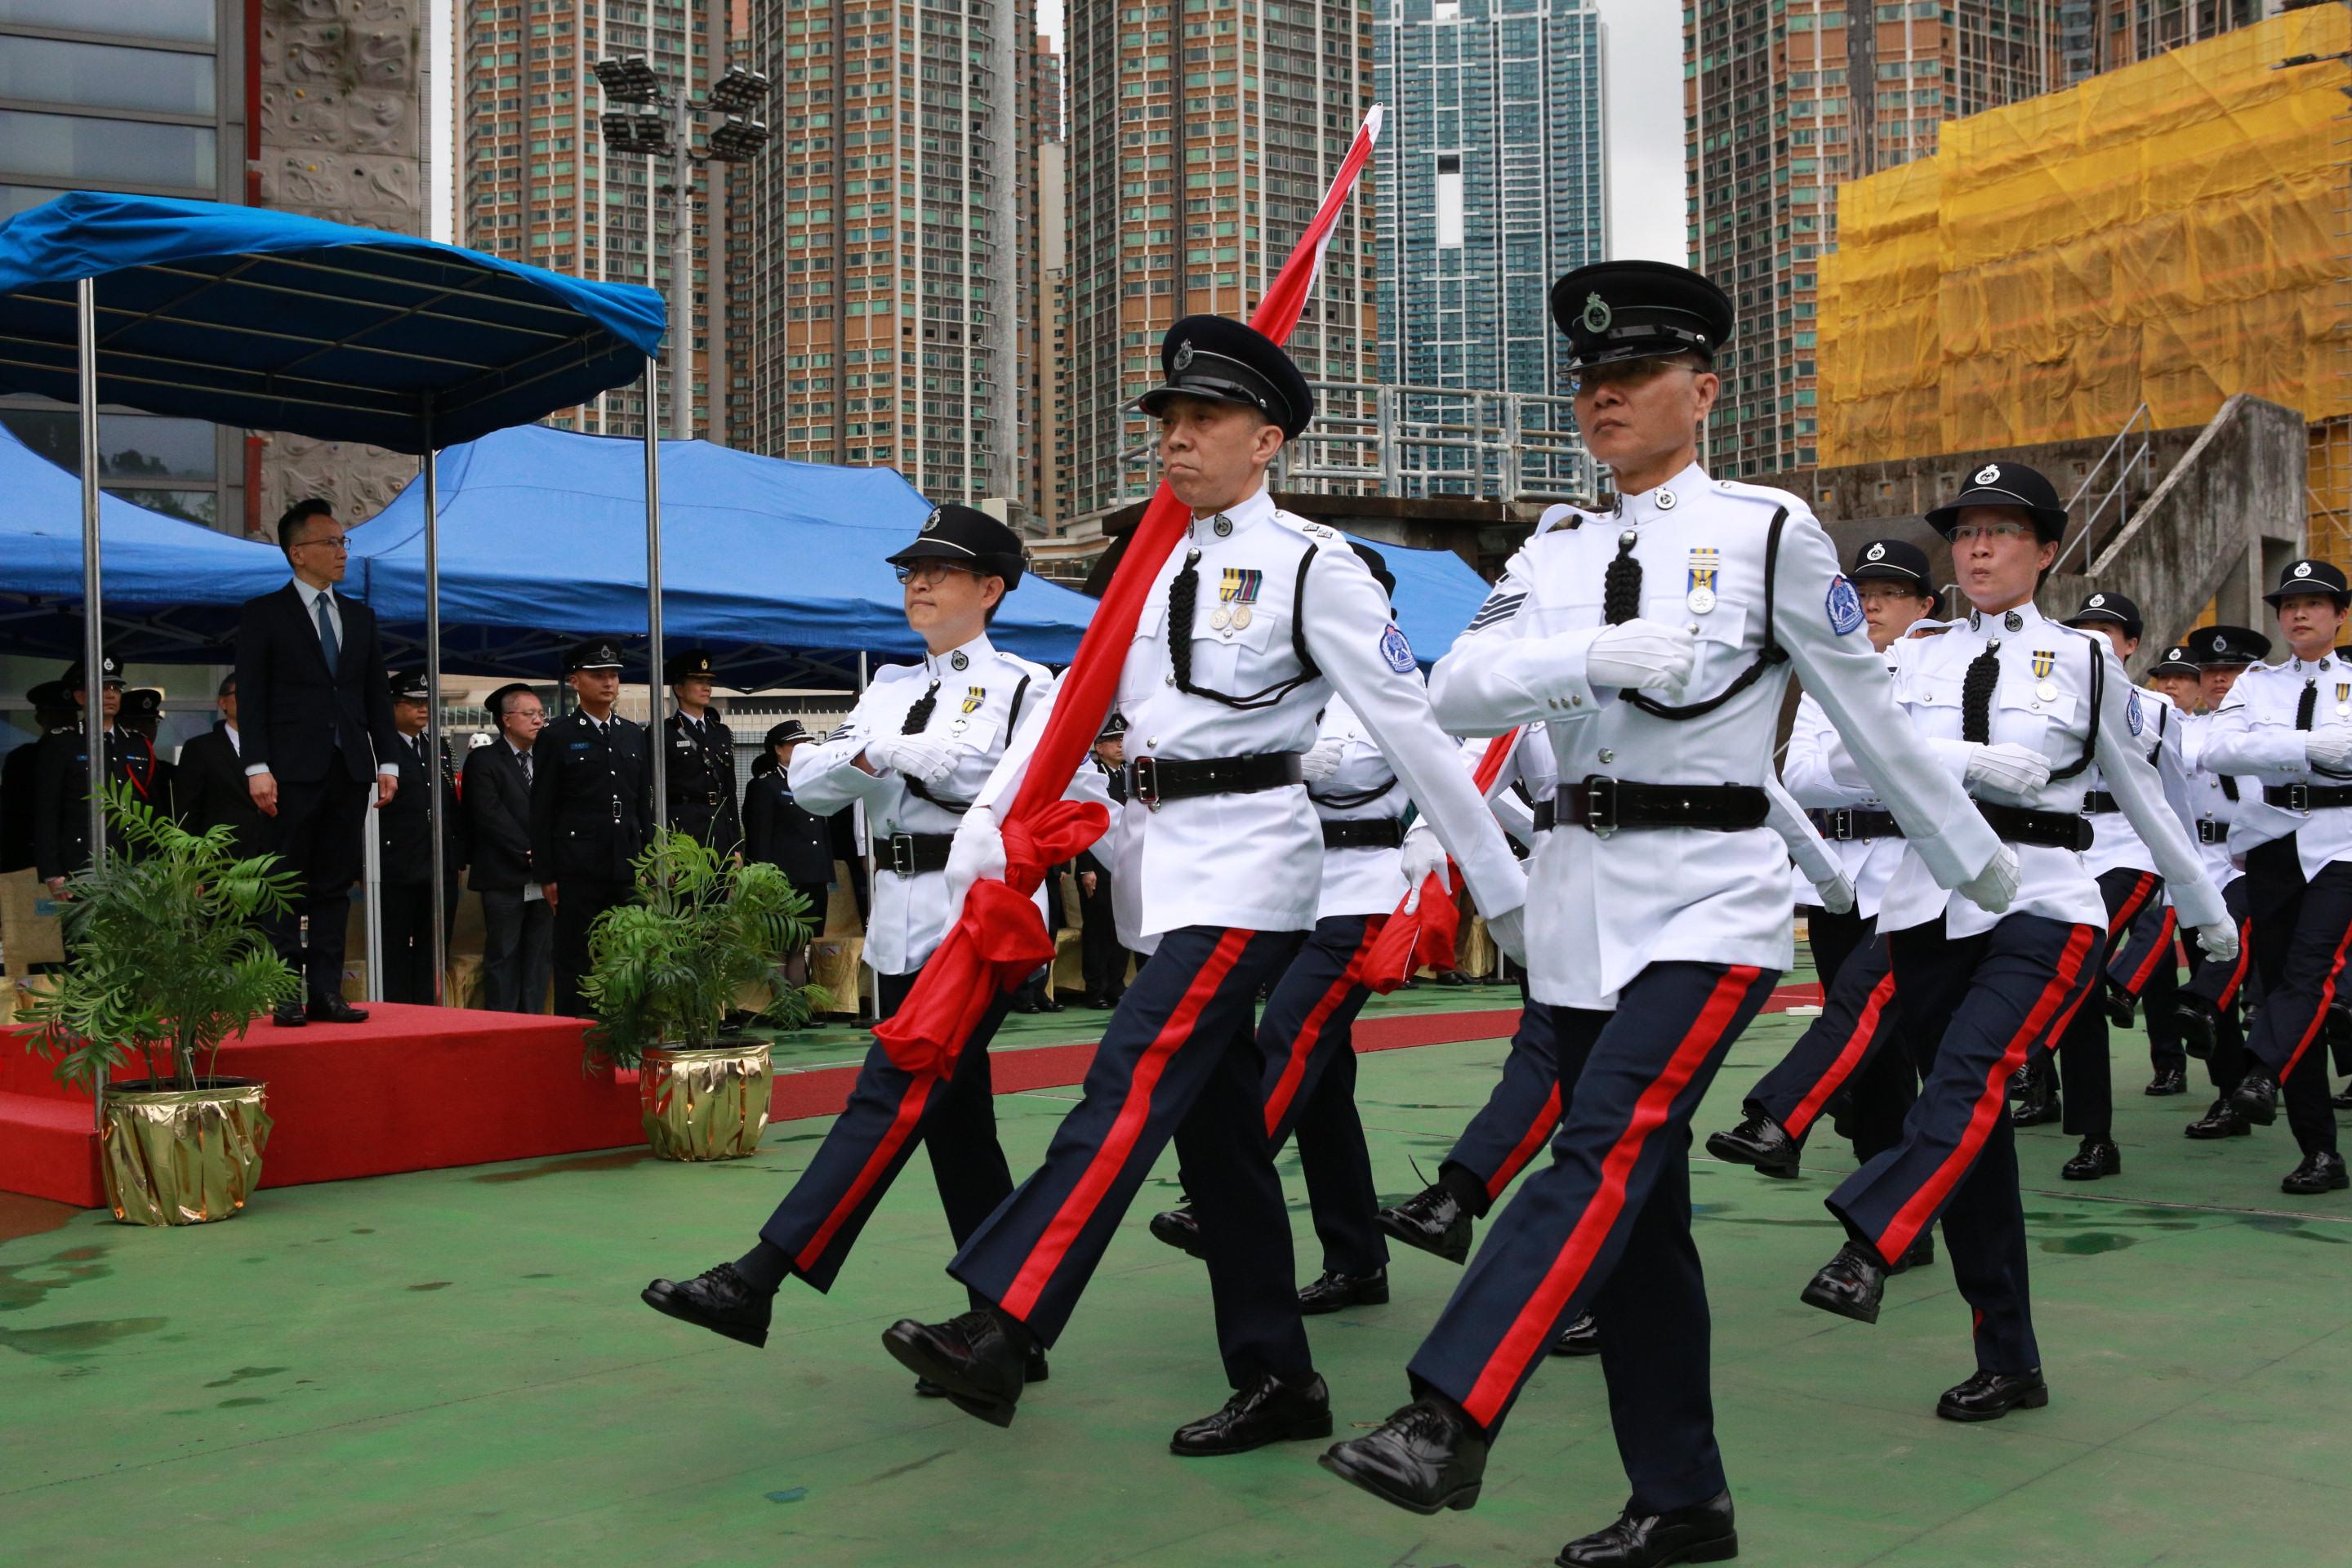 The Civil Aid Service held the 85th Recruits Passing-out Parade at its headquarters today (March 26). Photo shows the members taking part in the Chinese-style flag raising ceremony.